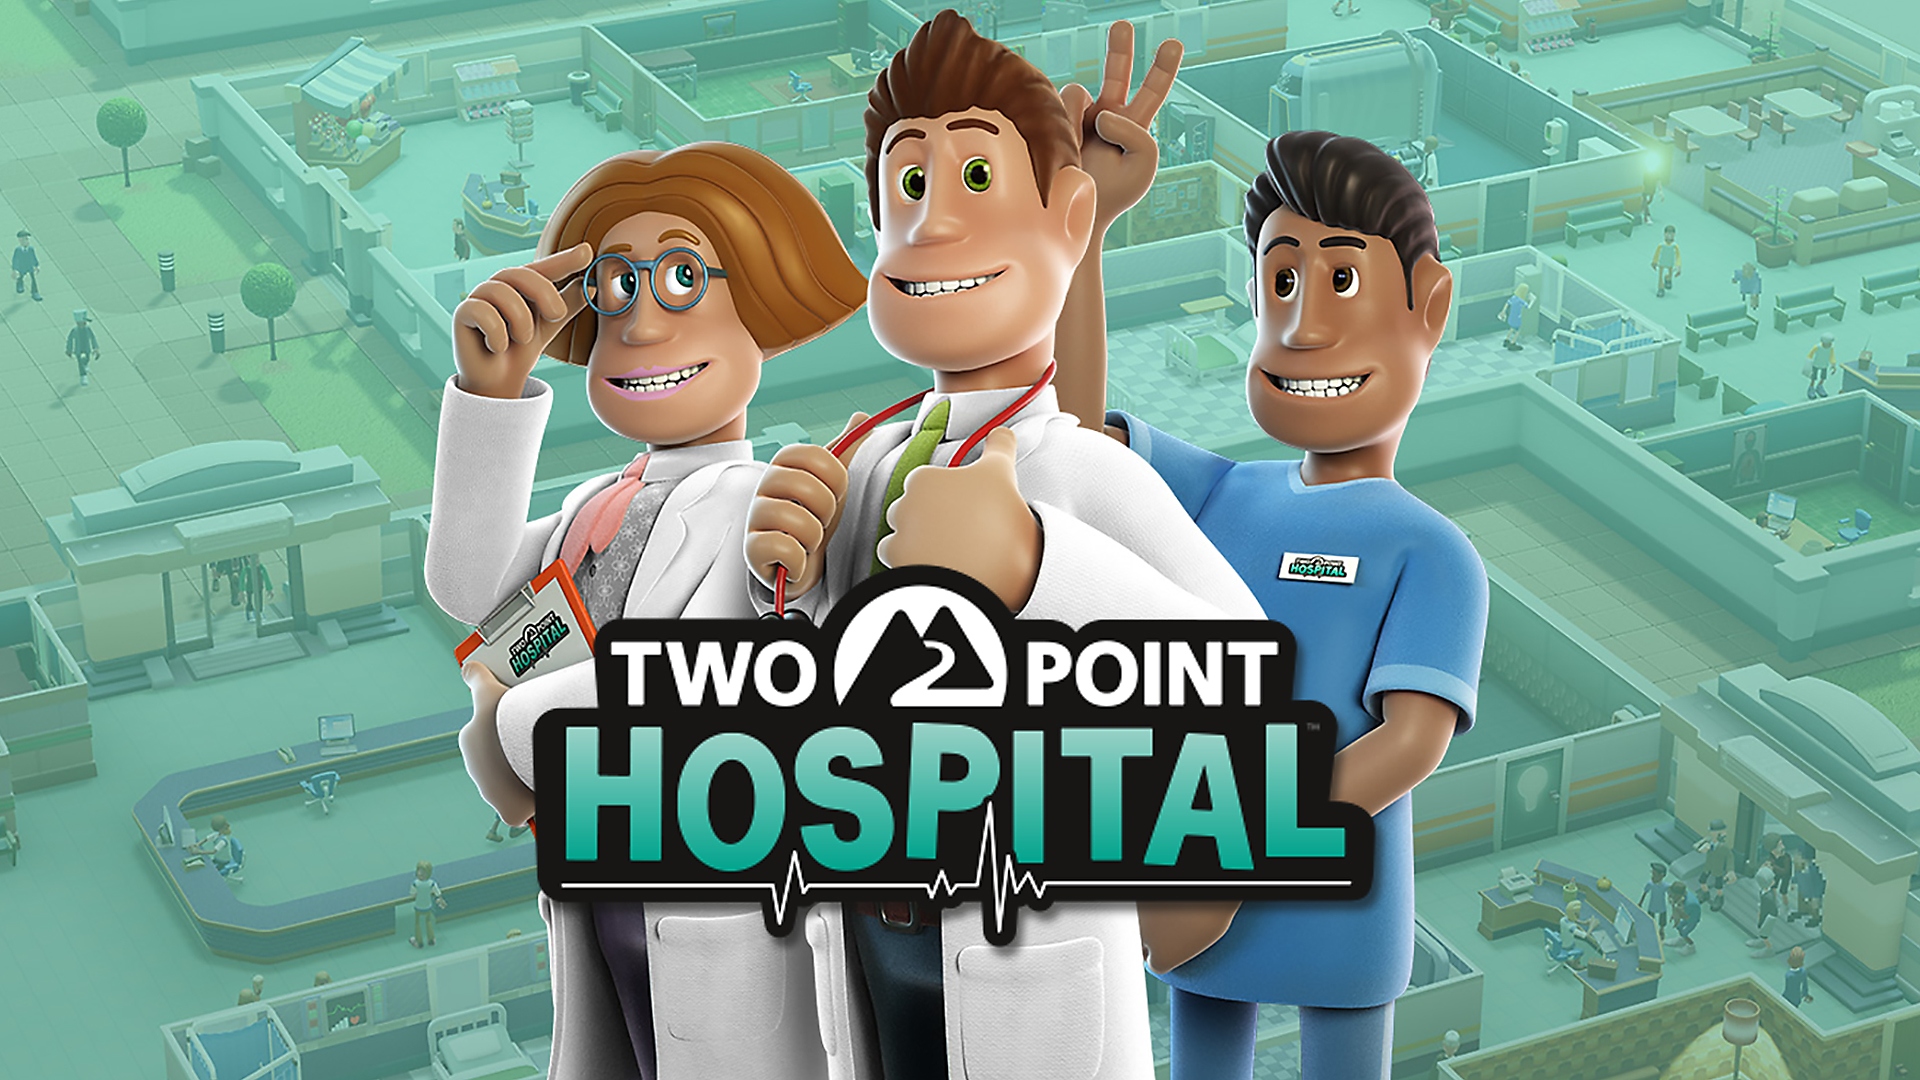 PS4《Two Point Hospital》宣傳影像